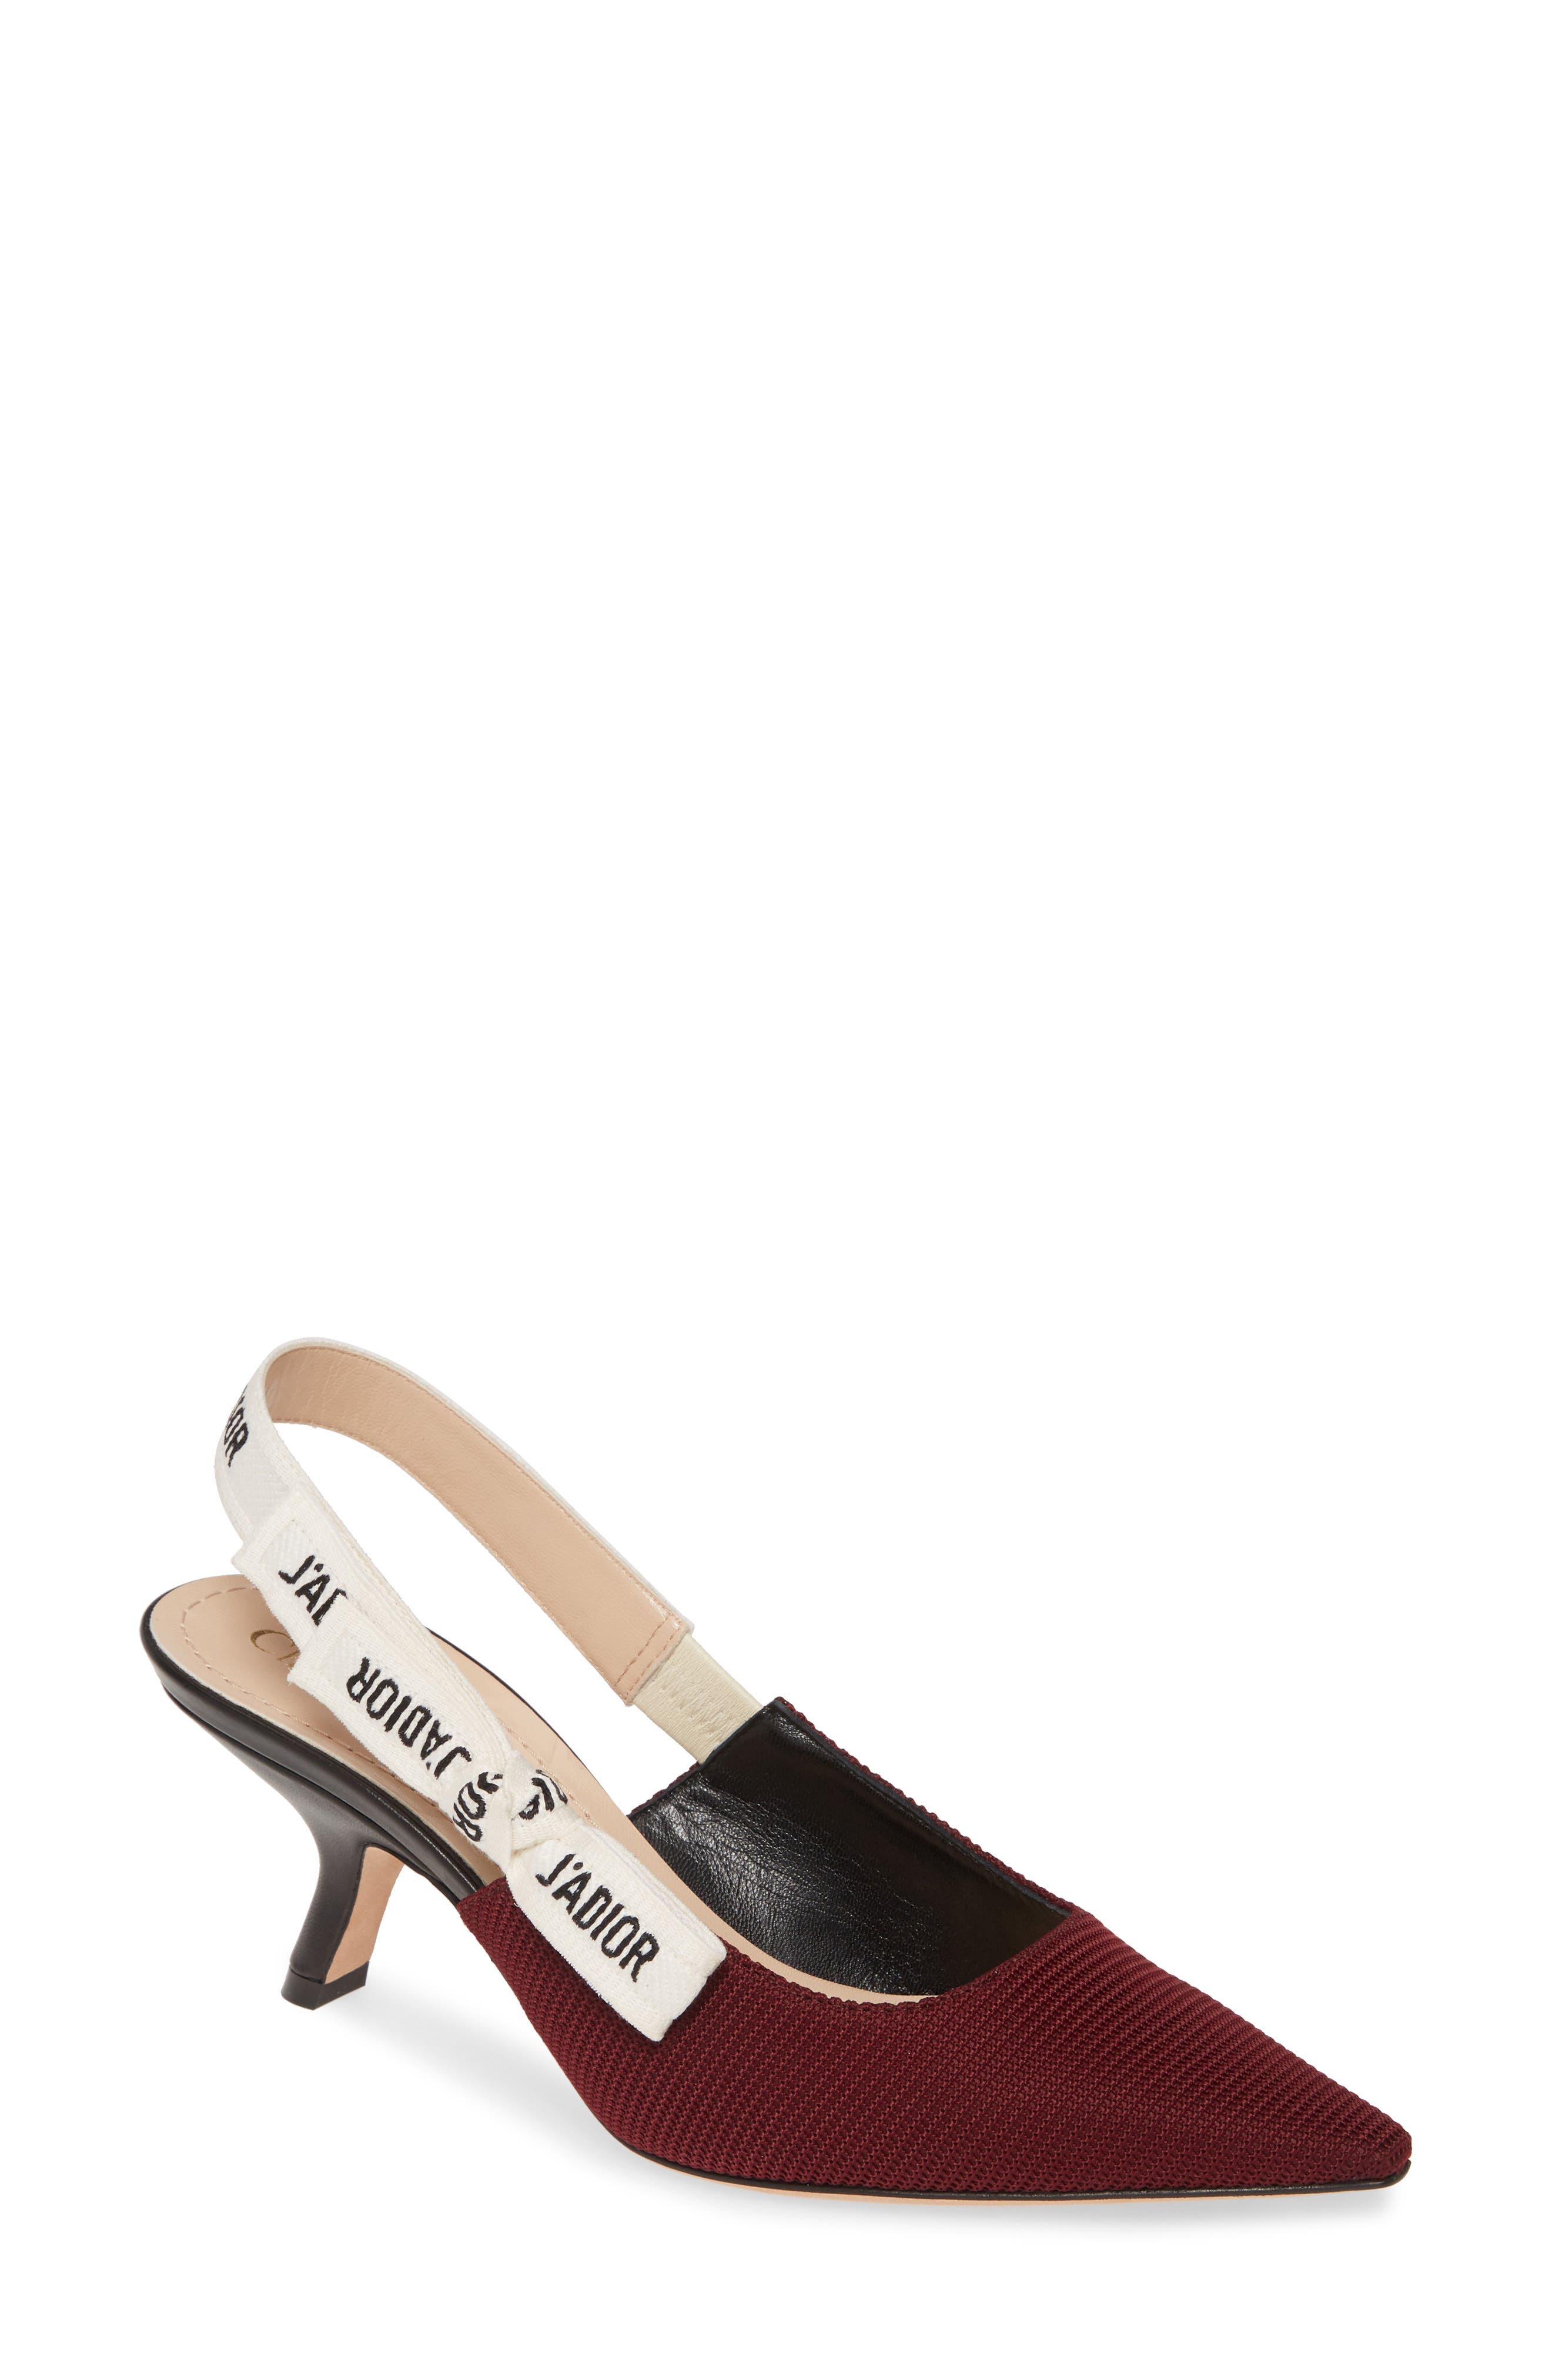 dior shoes womens price